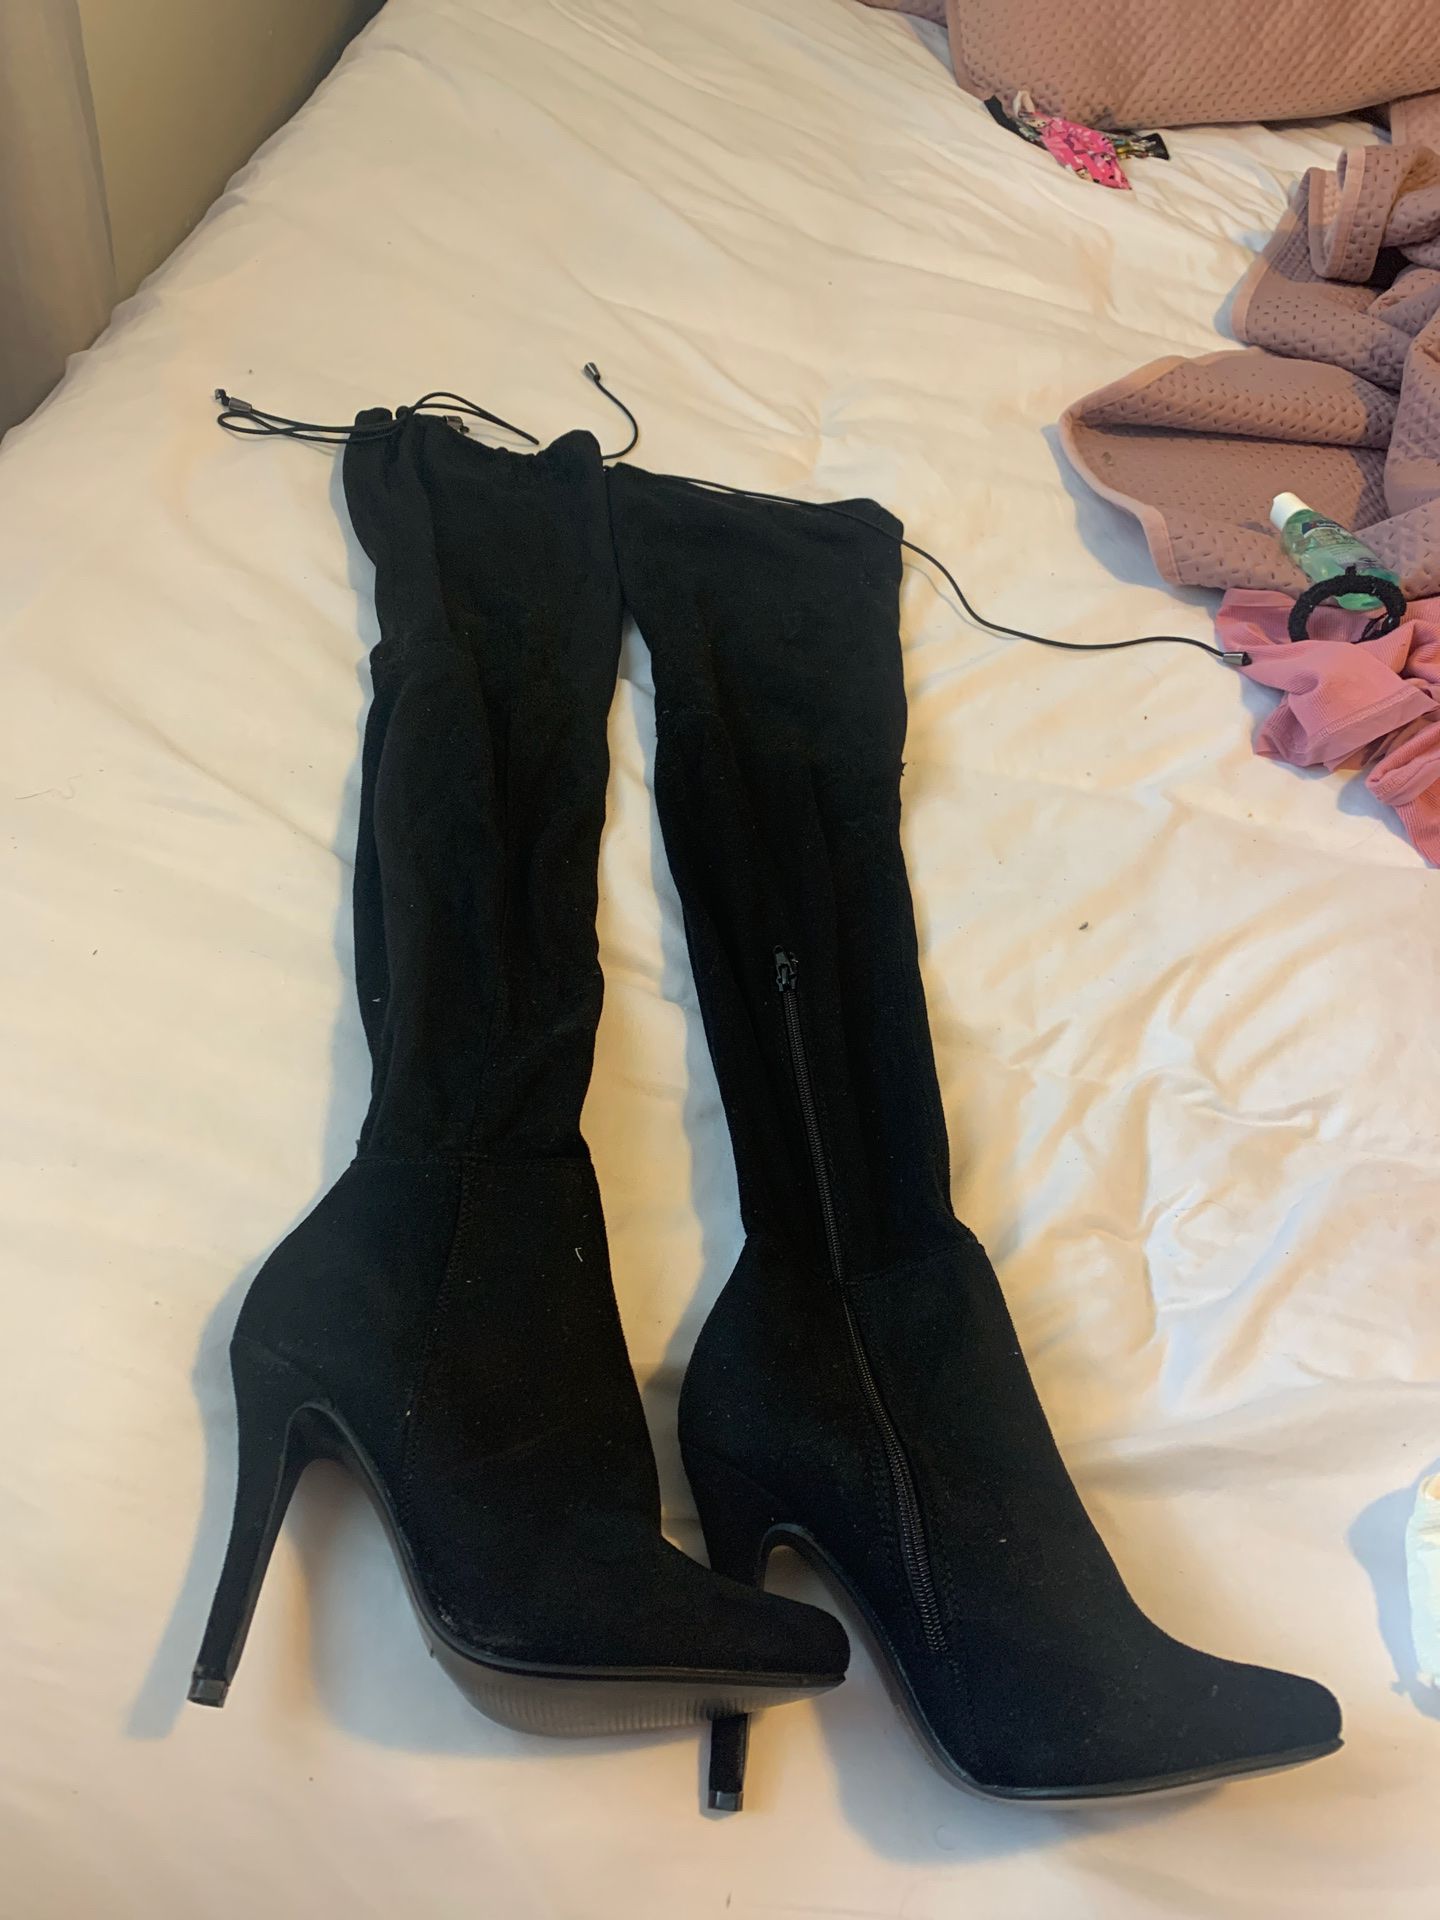 Brand new over the knee boots size 51/2